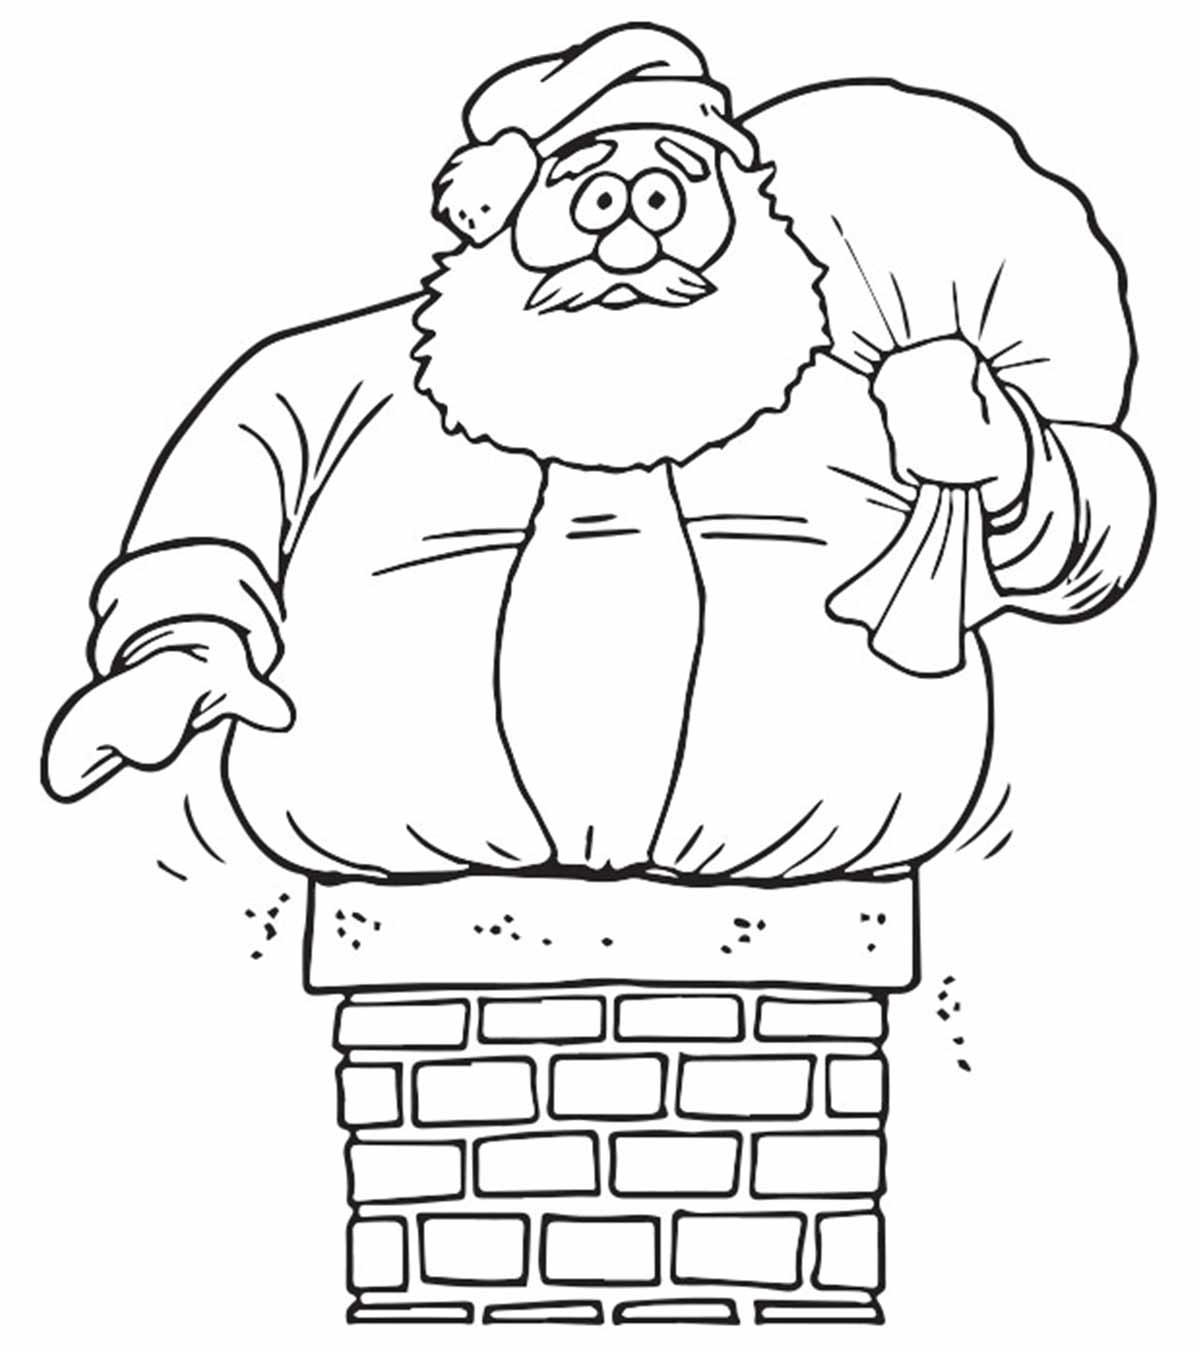 Coloring Pages Santa 30 Cute Santa Claus Coloring Pages For Your Little Ones